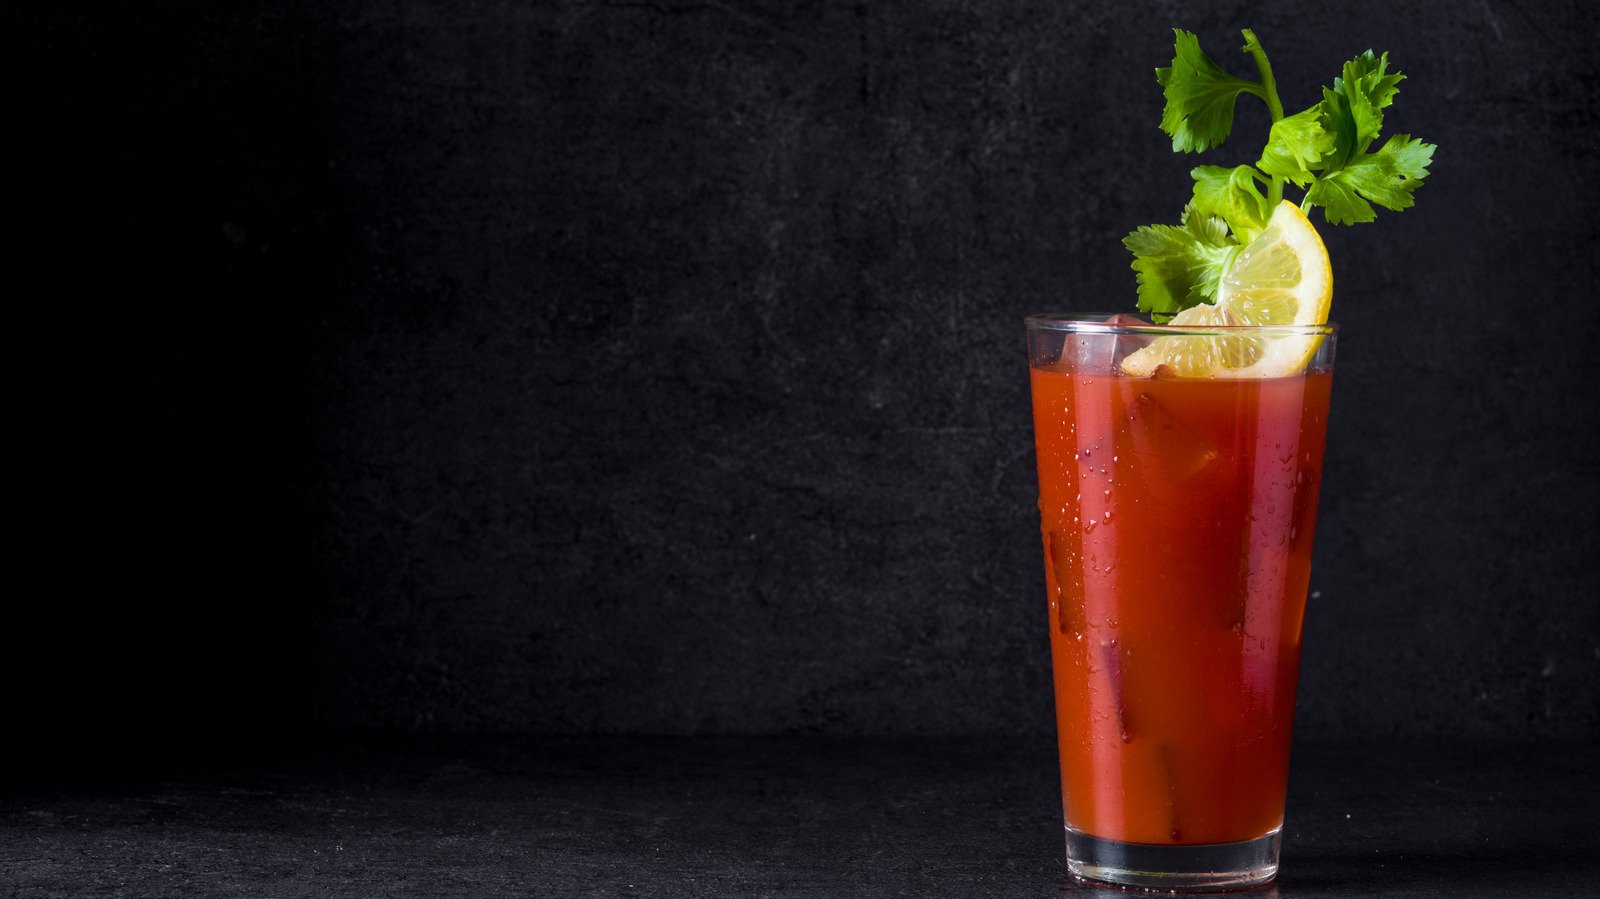 The Real Purpose Of Adding Lemon To A Bloody Mary